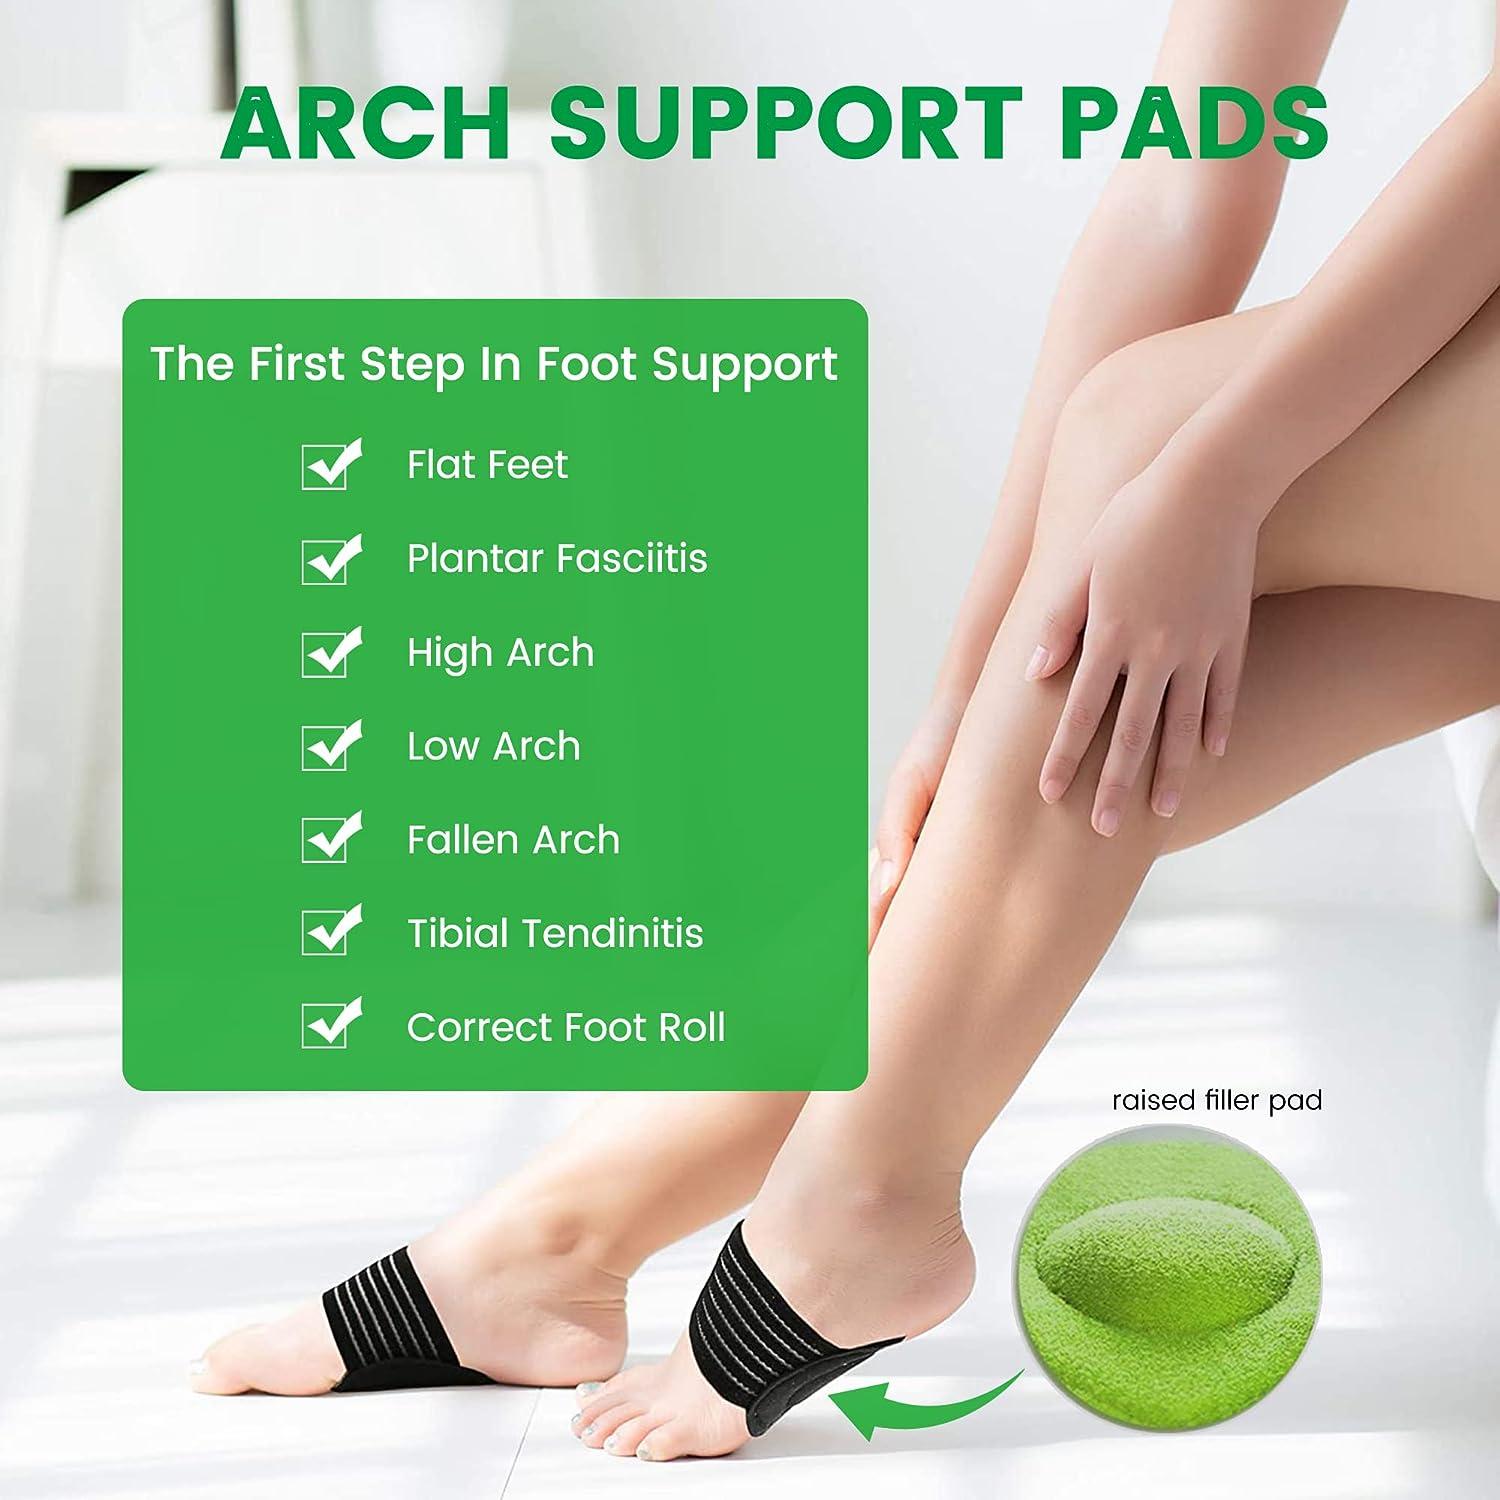 Arch Supports for Plantar Fasciitis Relief | Compression Sleeve Foot Brace  For Heel Pain, Bone Spurs, Flat Feet, High Arches | Copper Infused Arch